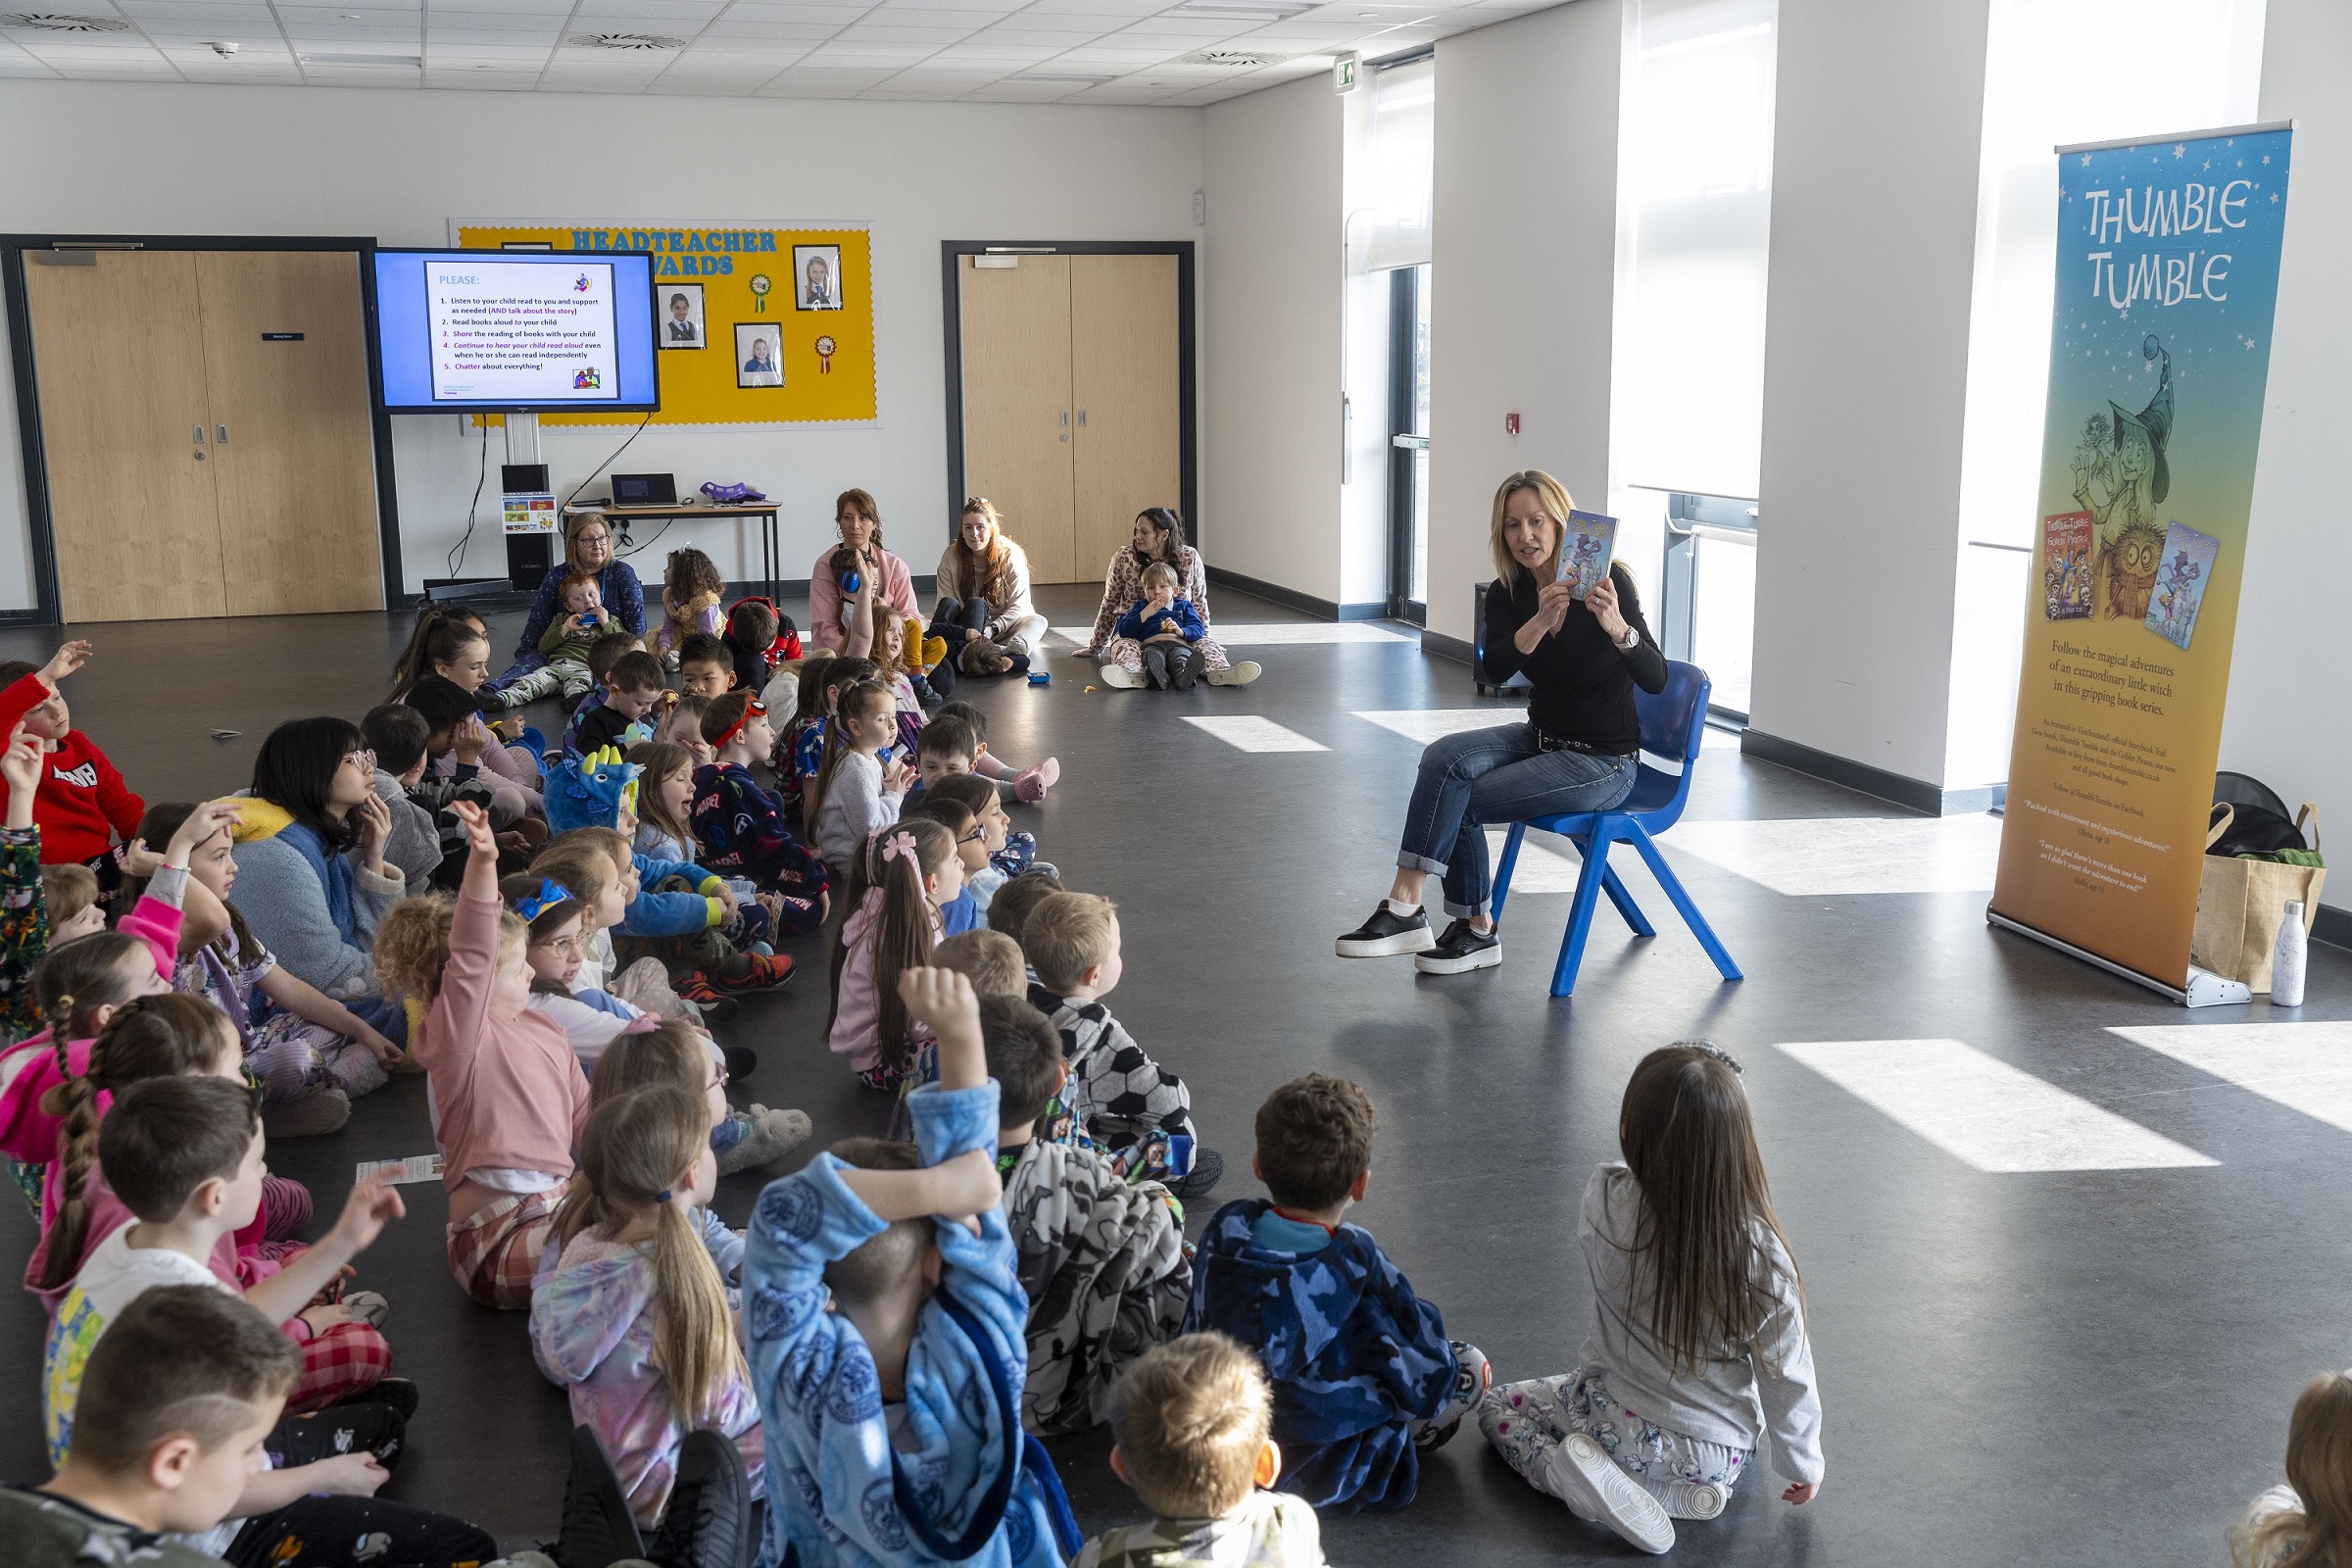 Award-winning author Angela Proctor visits Jackton Primary School for special reading